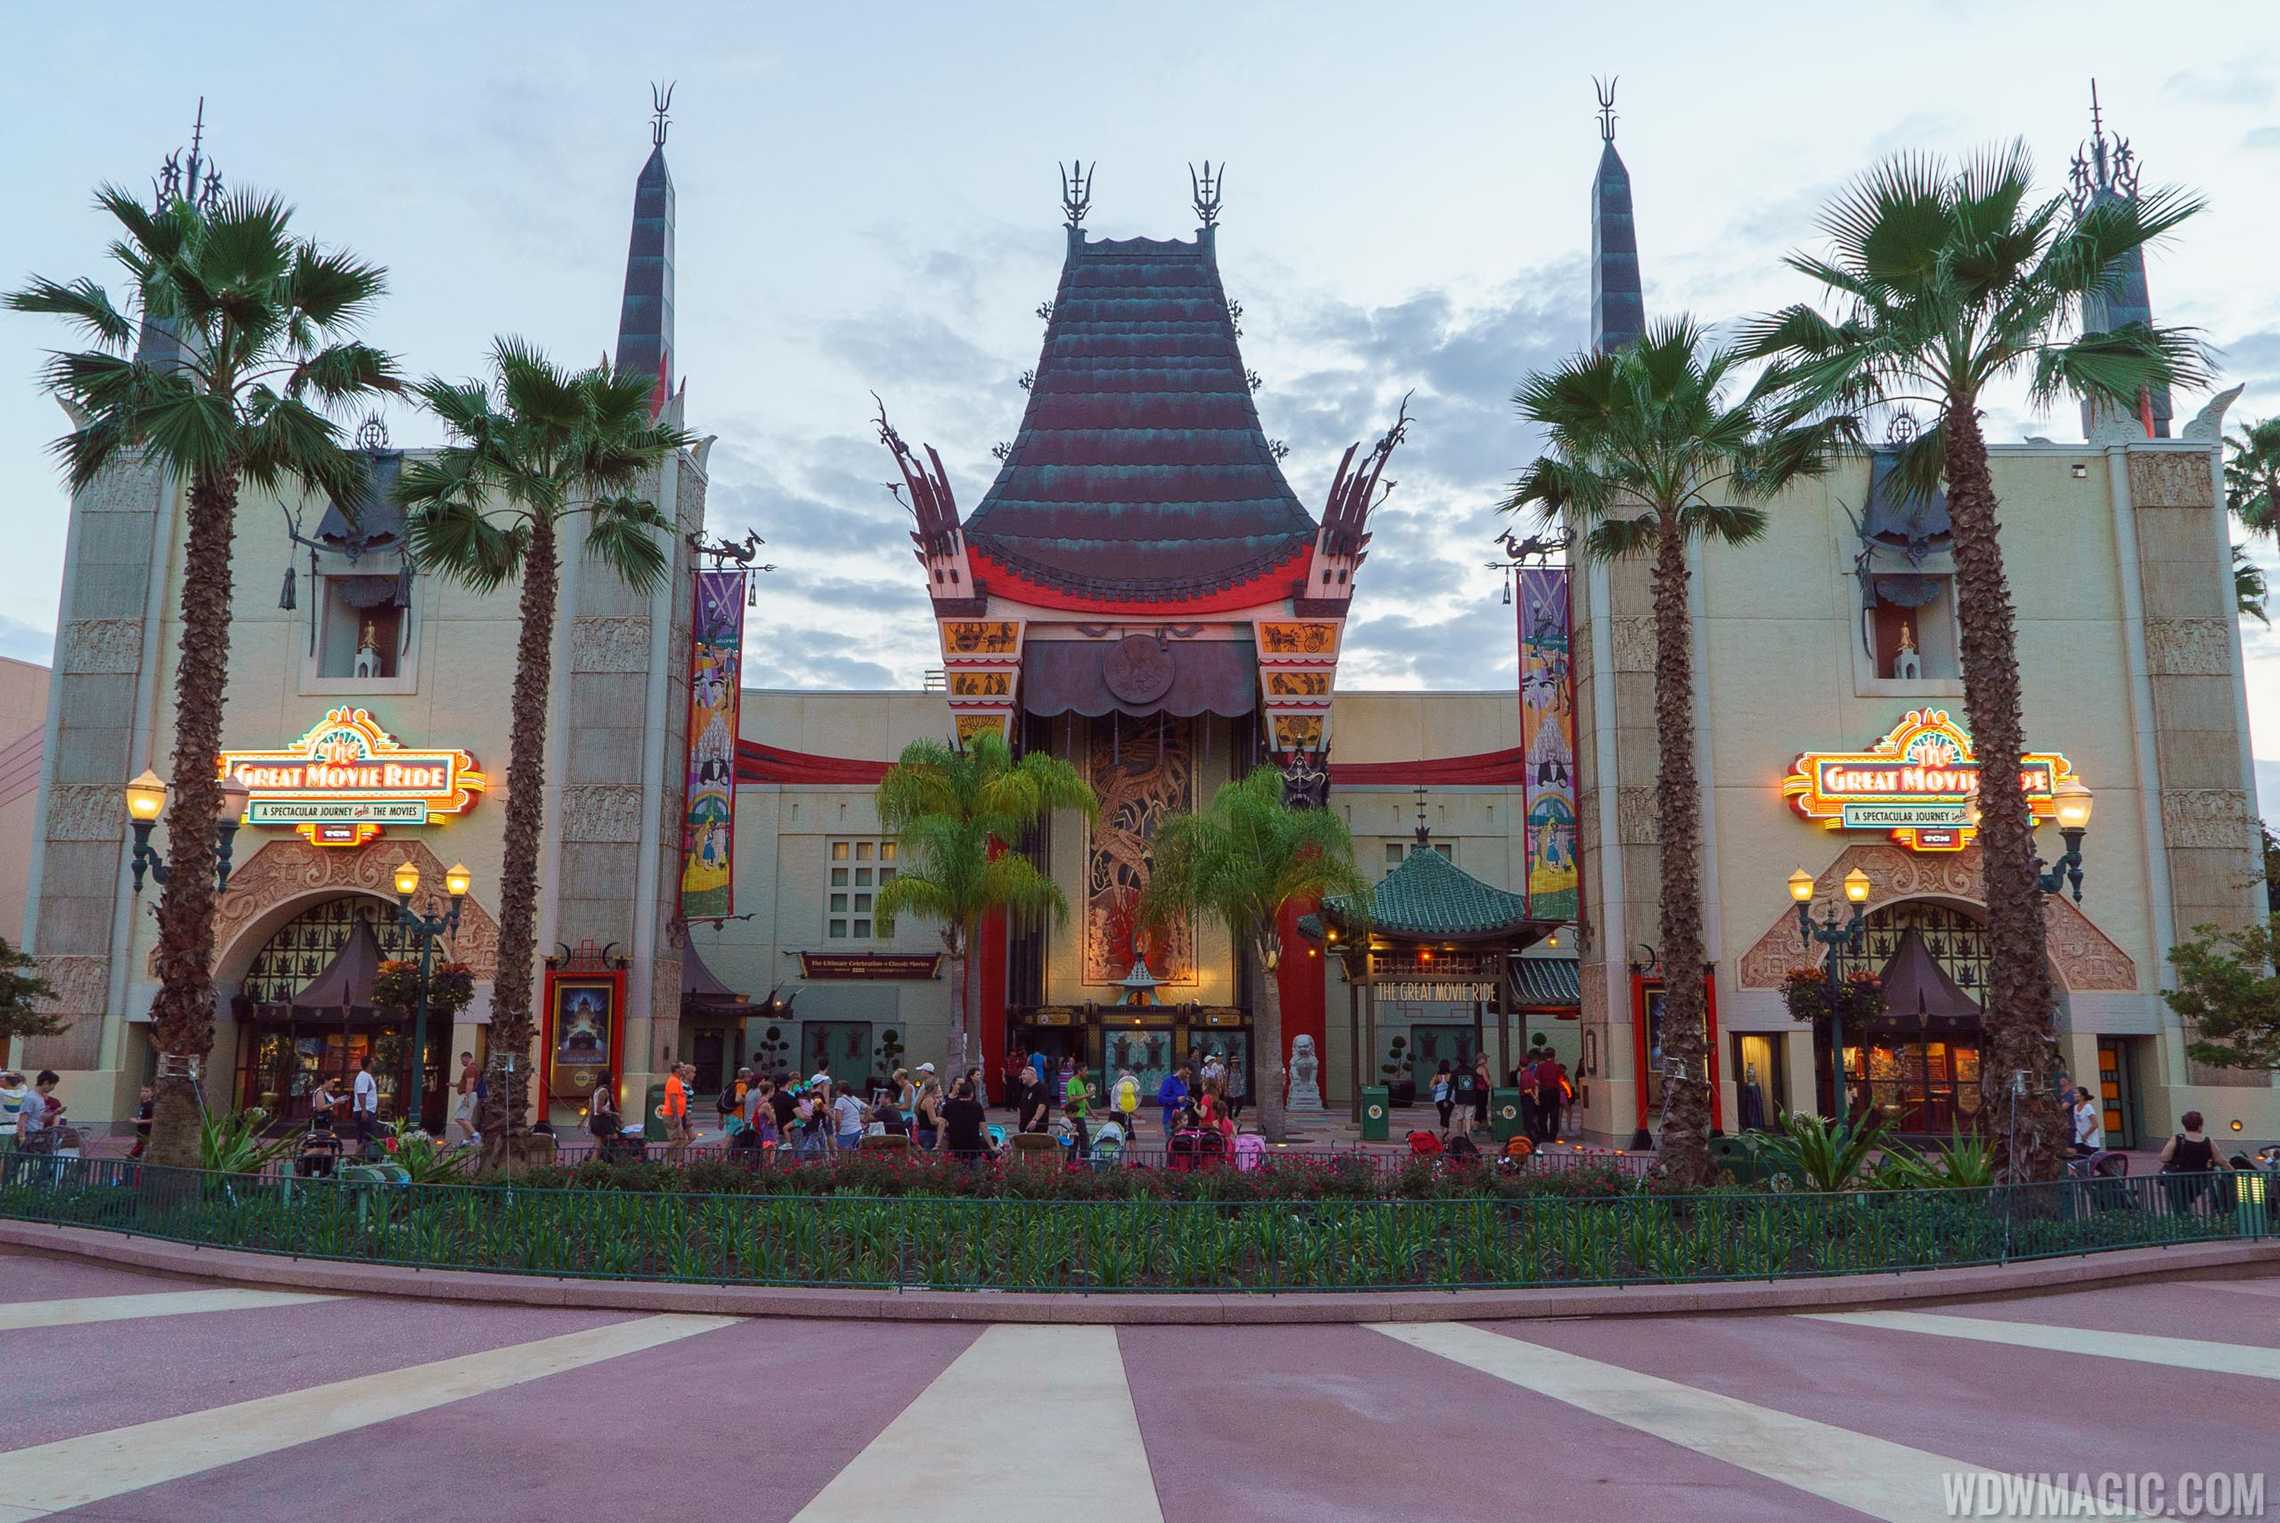 The Great Movie Ride Closing for a New Mickey Ride